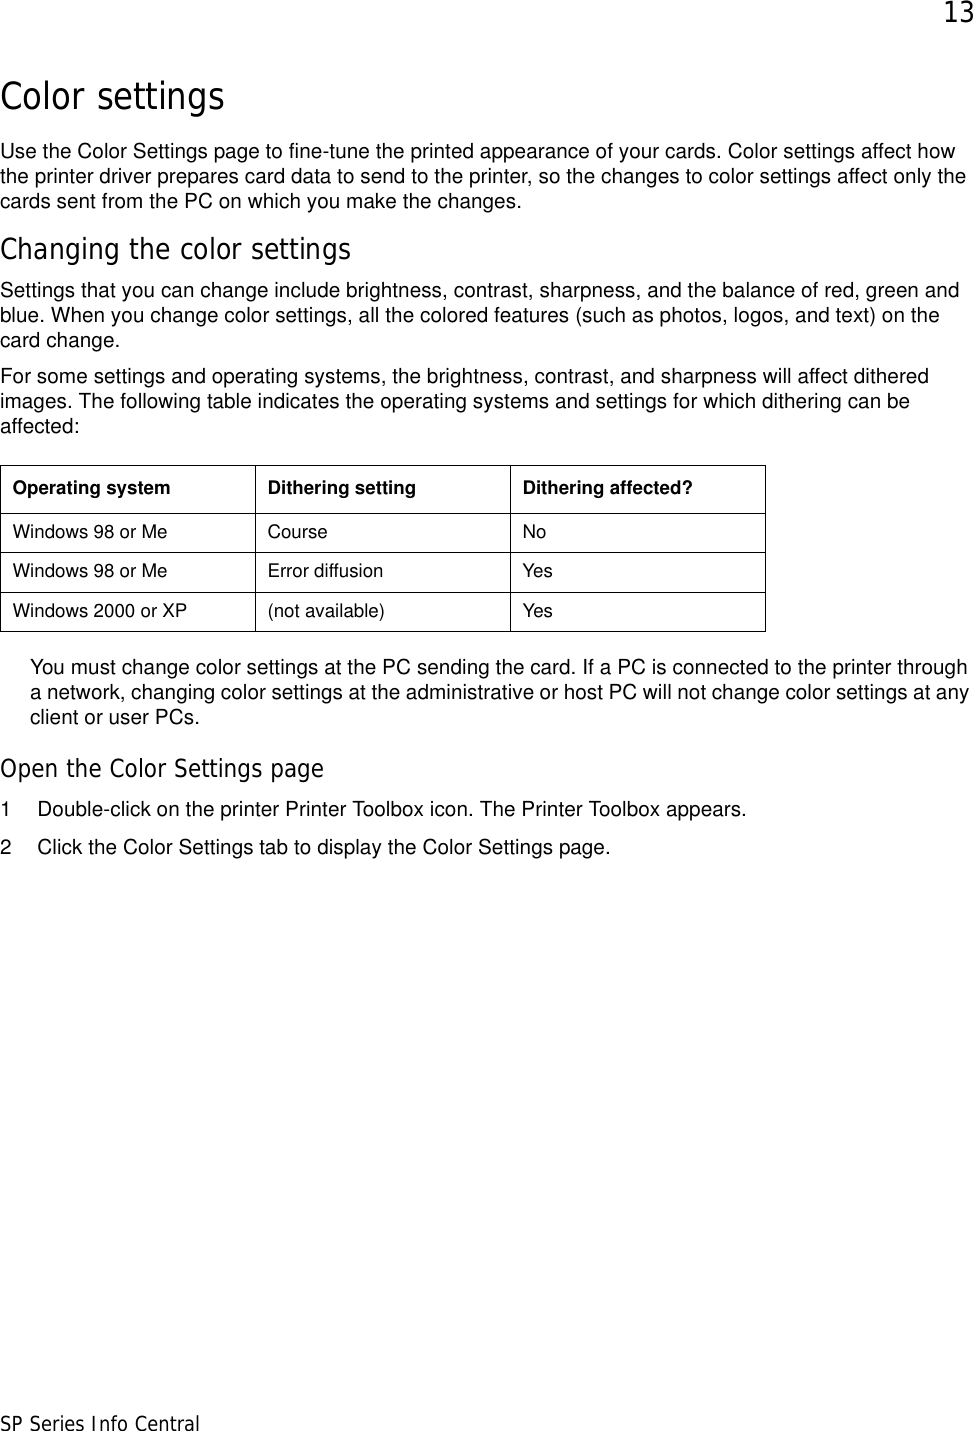 13SP Series Info CentralColor settingsUse the Color Settings page to fine-tune the printed appearance of your cards. Color settings affect how the printer driver prepares card data to send to the printer, so the changes to color settings affect only the cards sent from the PC on which you make the changes.Changing the color settingsSettings that you can change include brightness, contrast, sharpness, and the balance of red, green and blue. When you change color settings, all the colored features (such as photos, logos, and text) on the card change. For some settings and operating systems, the brightness, contrast, and sharpness will affect dithered images. The following table indicates the operating systems and settings for which dithering can be affected:You must change color settings at the PC sending the card. If a PC is connected to the printer through a network, changing color settings at the administrative or host PC will not change color settings at any client or user PCs. Open the Color Settings page1 Double-click on the printer Printer Toolbox icon. The Printer Toolbox appears.2 Click the Color Settings tab to display the Color Settings page.Operating system  Dithering setting Dithering affected?Windows 98 or Me Course NoWindows 98 or Me Error diffusion YesWindows 2000 or XP (not available) Yes